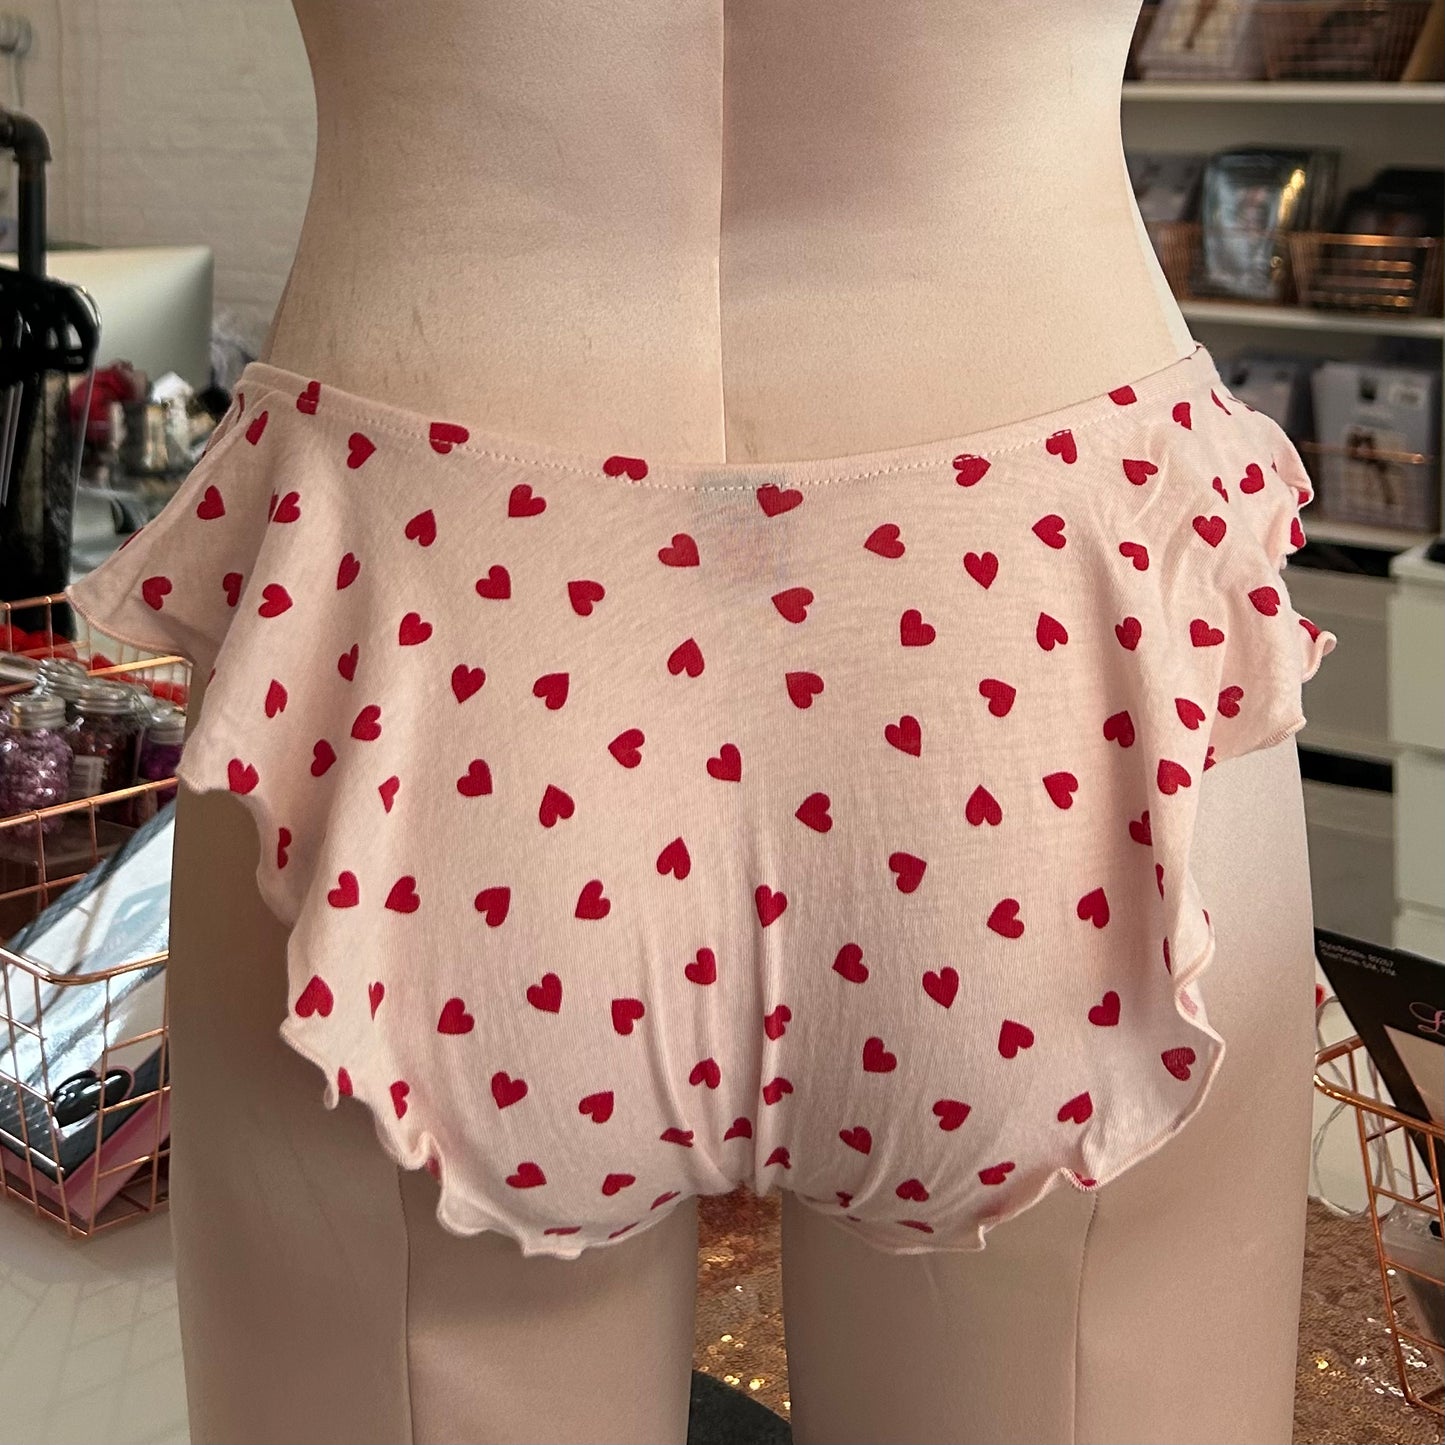 Heritage Heart Butterfly Brief - Cotton Candy Pink